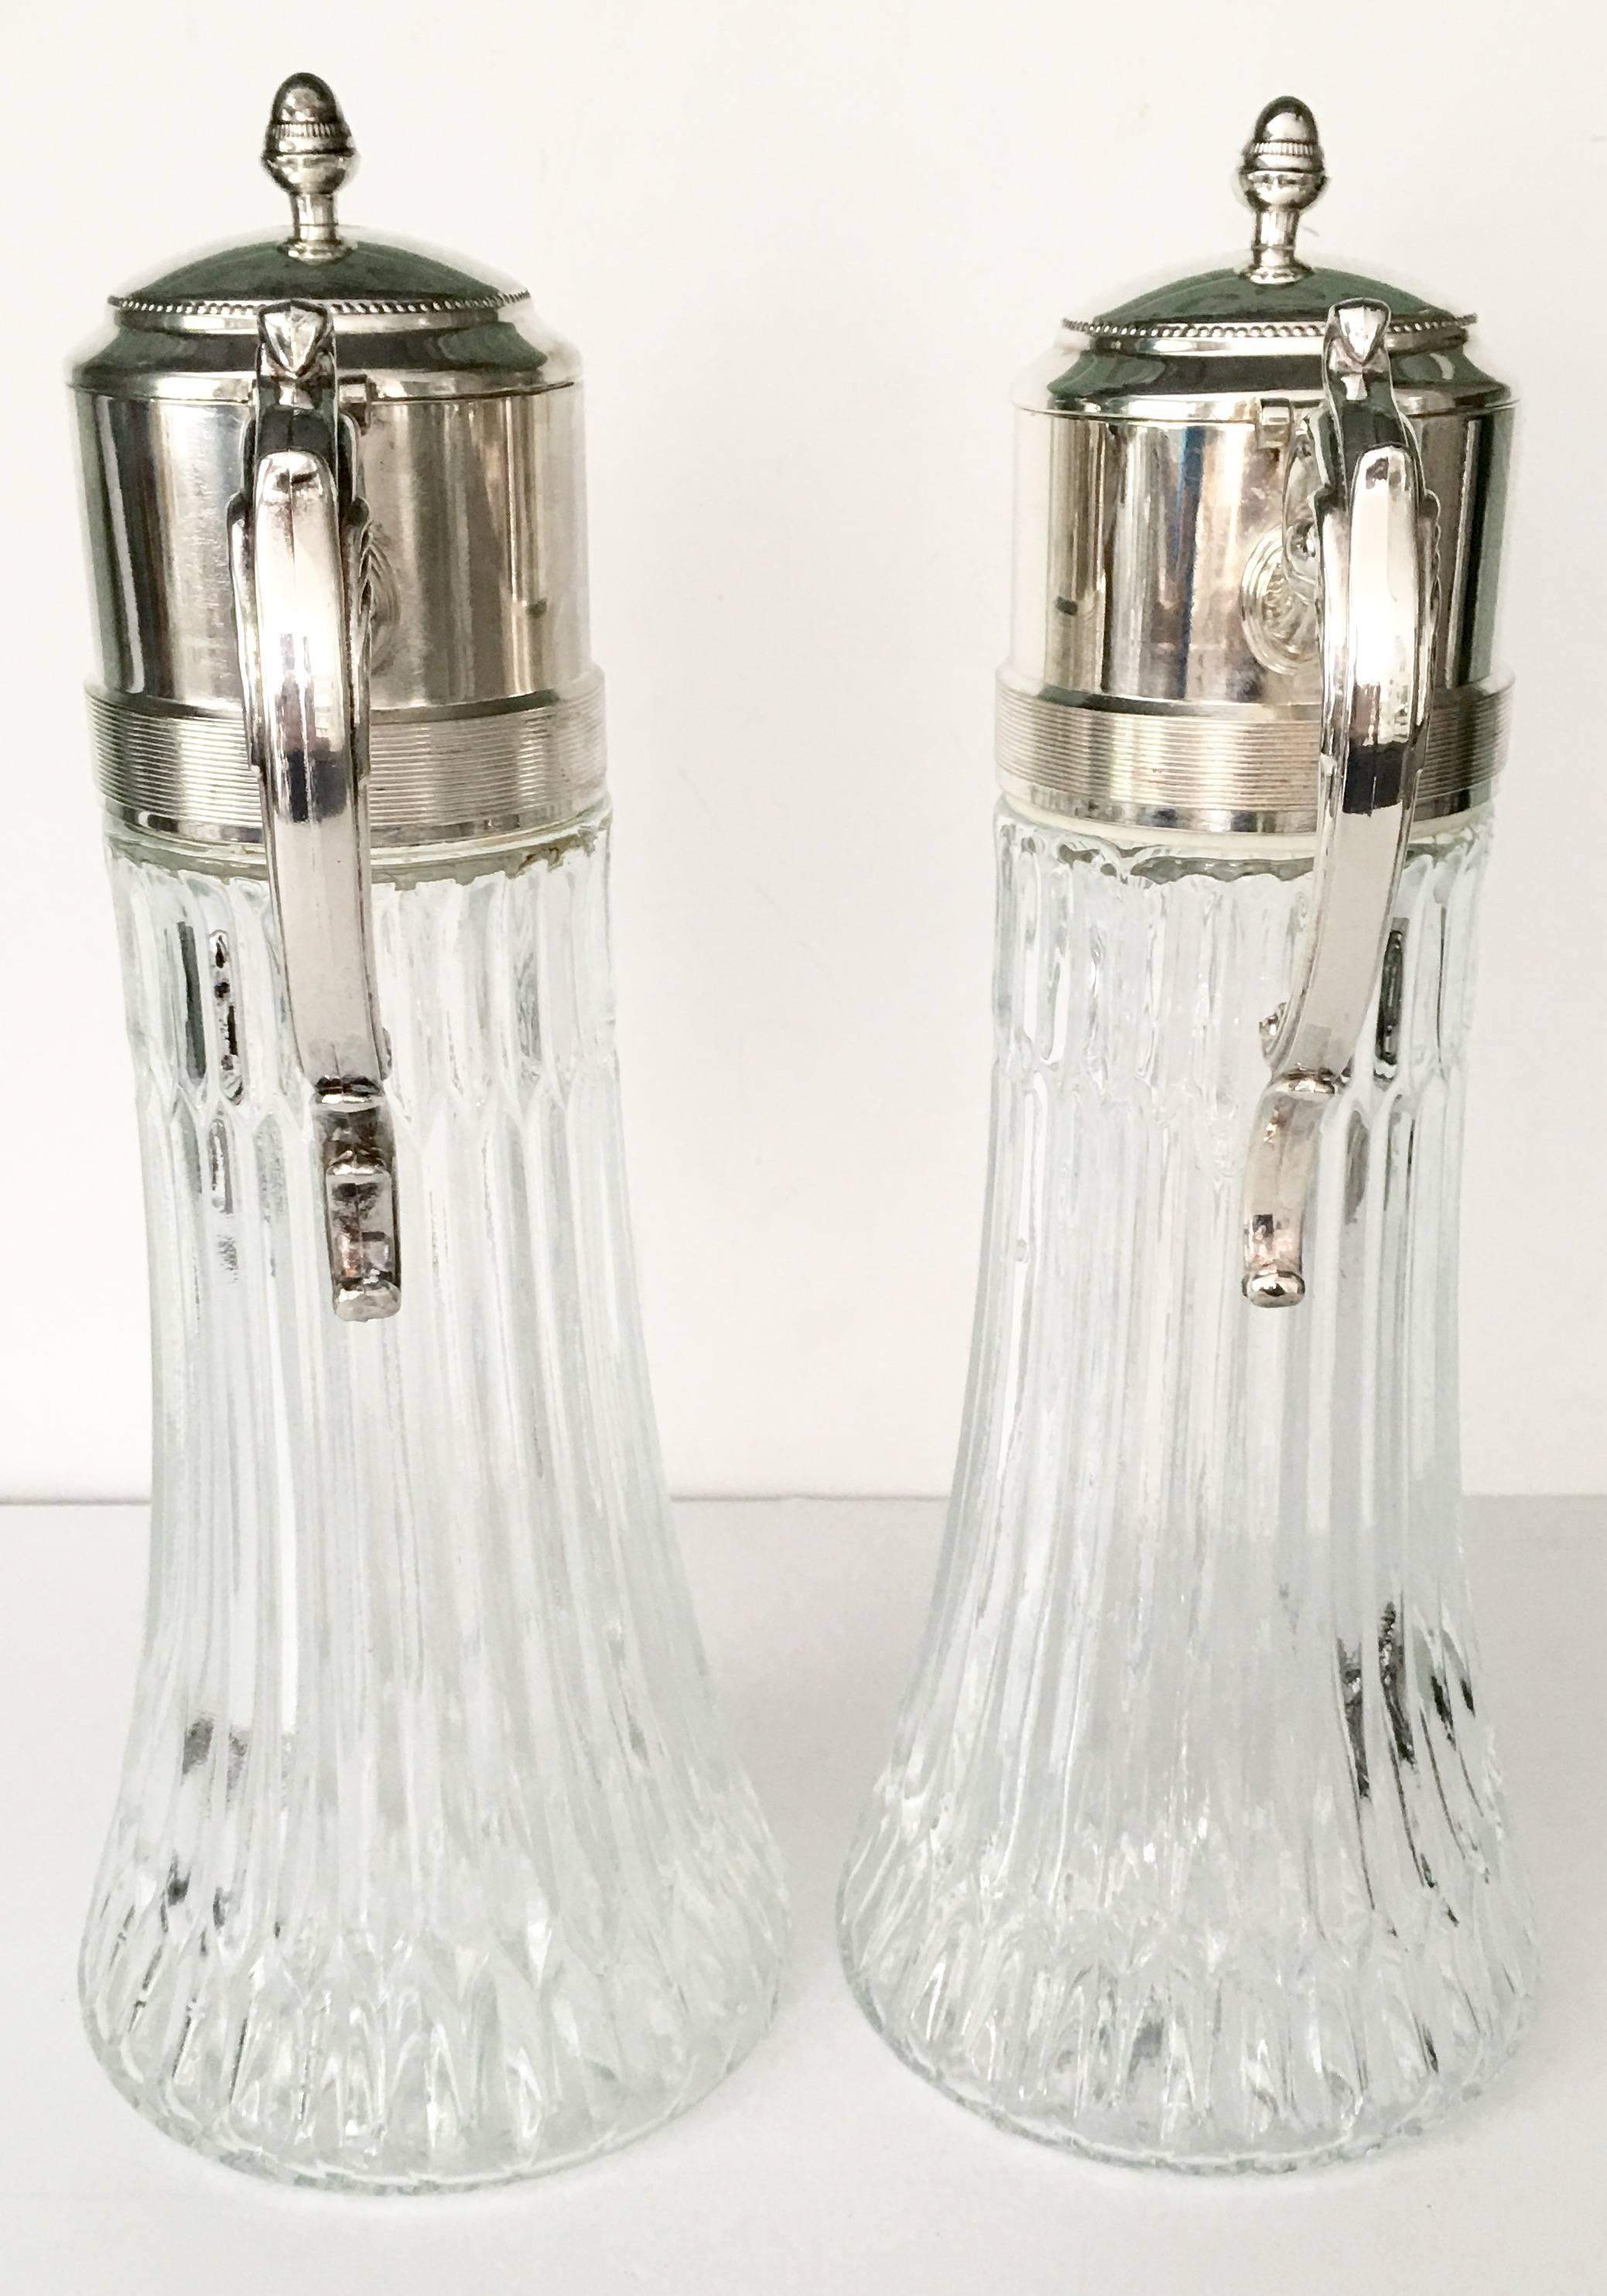 Mid-20th century brilliant cut-glass and silver plate scroll motif handle screw top claret pitcher jugs. Each handle is slightly different at the bottom. One top is signed or hallmarked.